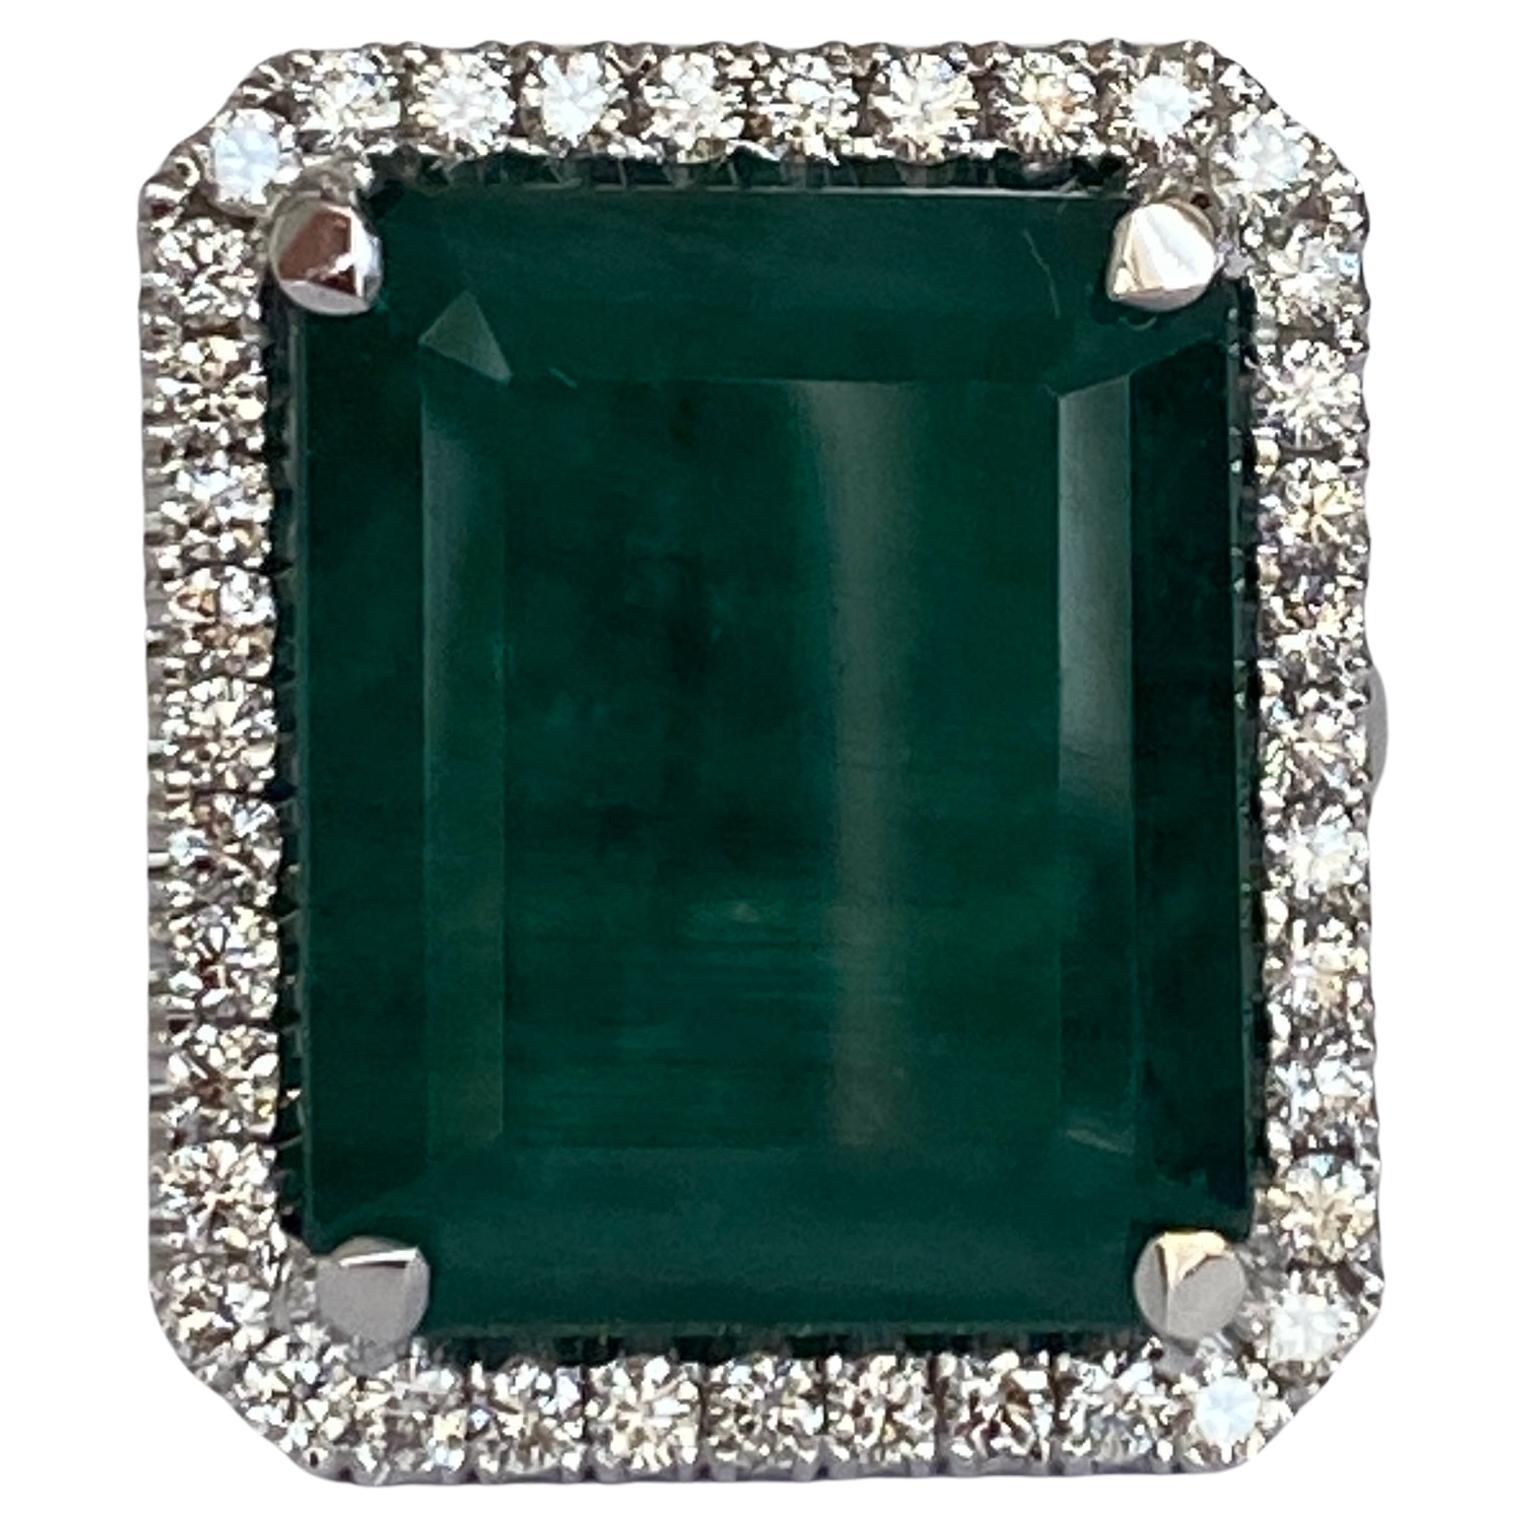 Offered in new condition, an 18 carat handmade white gold ring with a natural emerald cut emerald of 12.64 crt in the center, surrounded by 39 pieces of brilliant cut diamonds totaling approximately 0.65 crt of quality G/VS/SI. The color of the